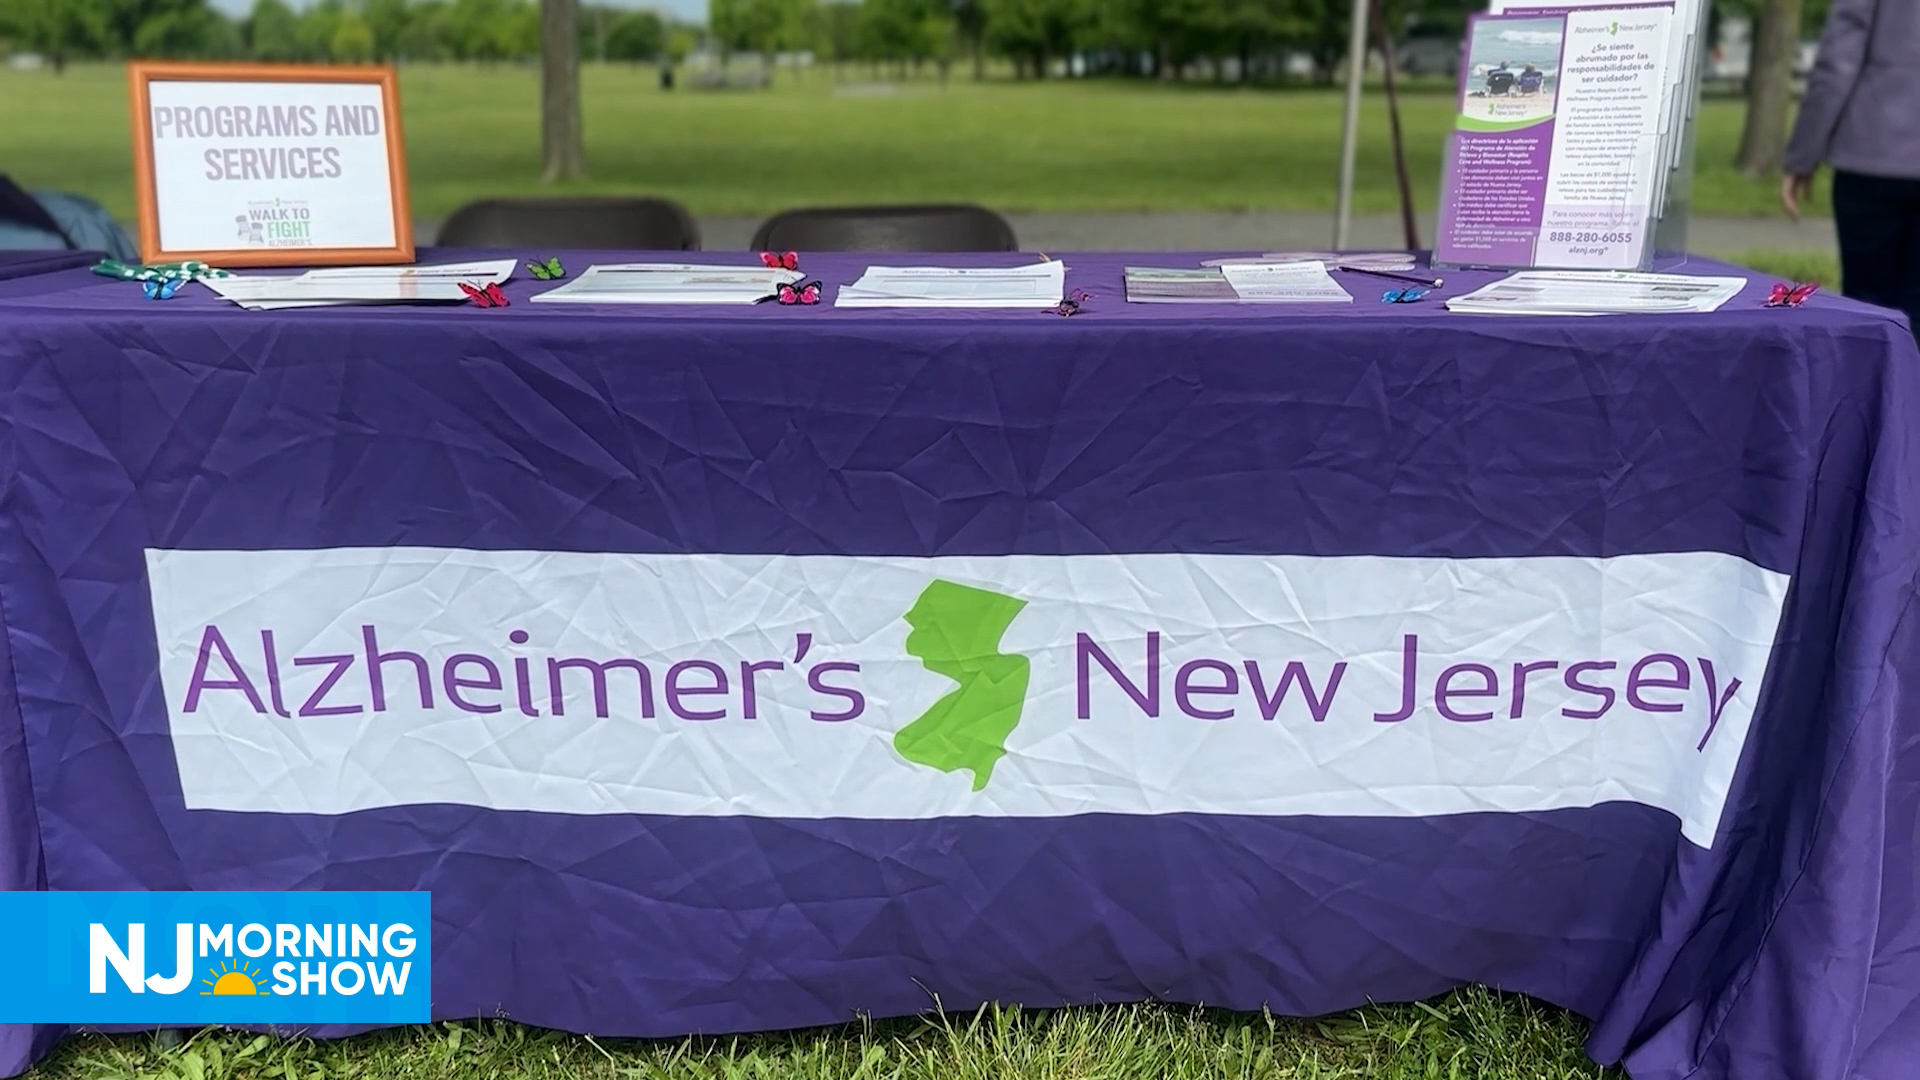 NJ Morning Show – Alzheimer’s New Jersey “Walk to Fight”